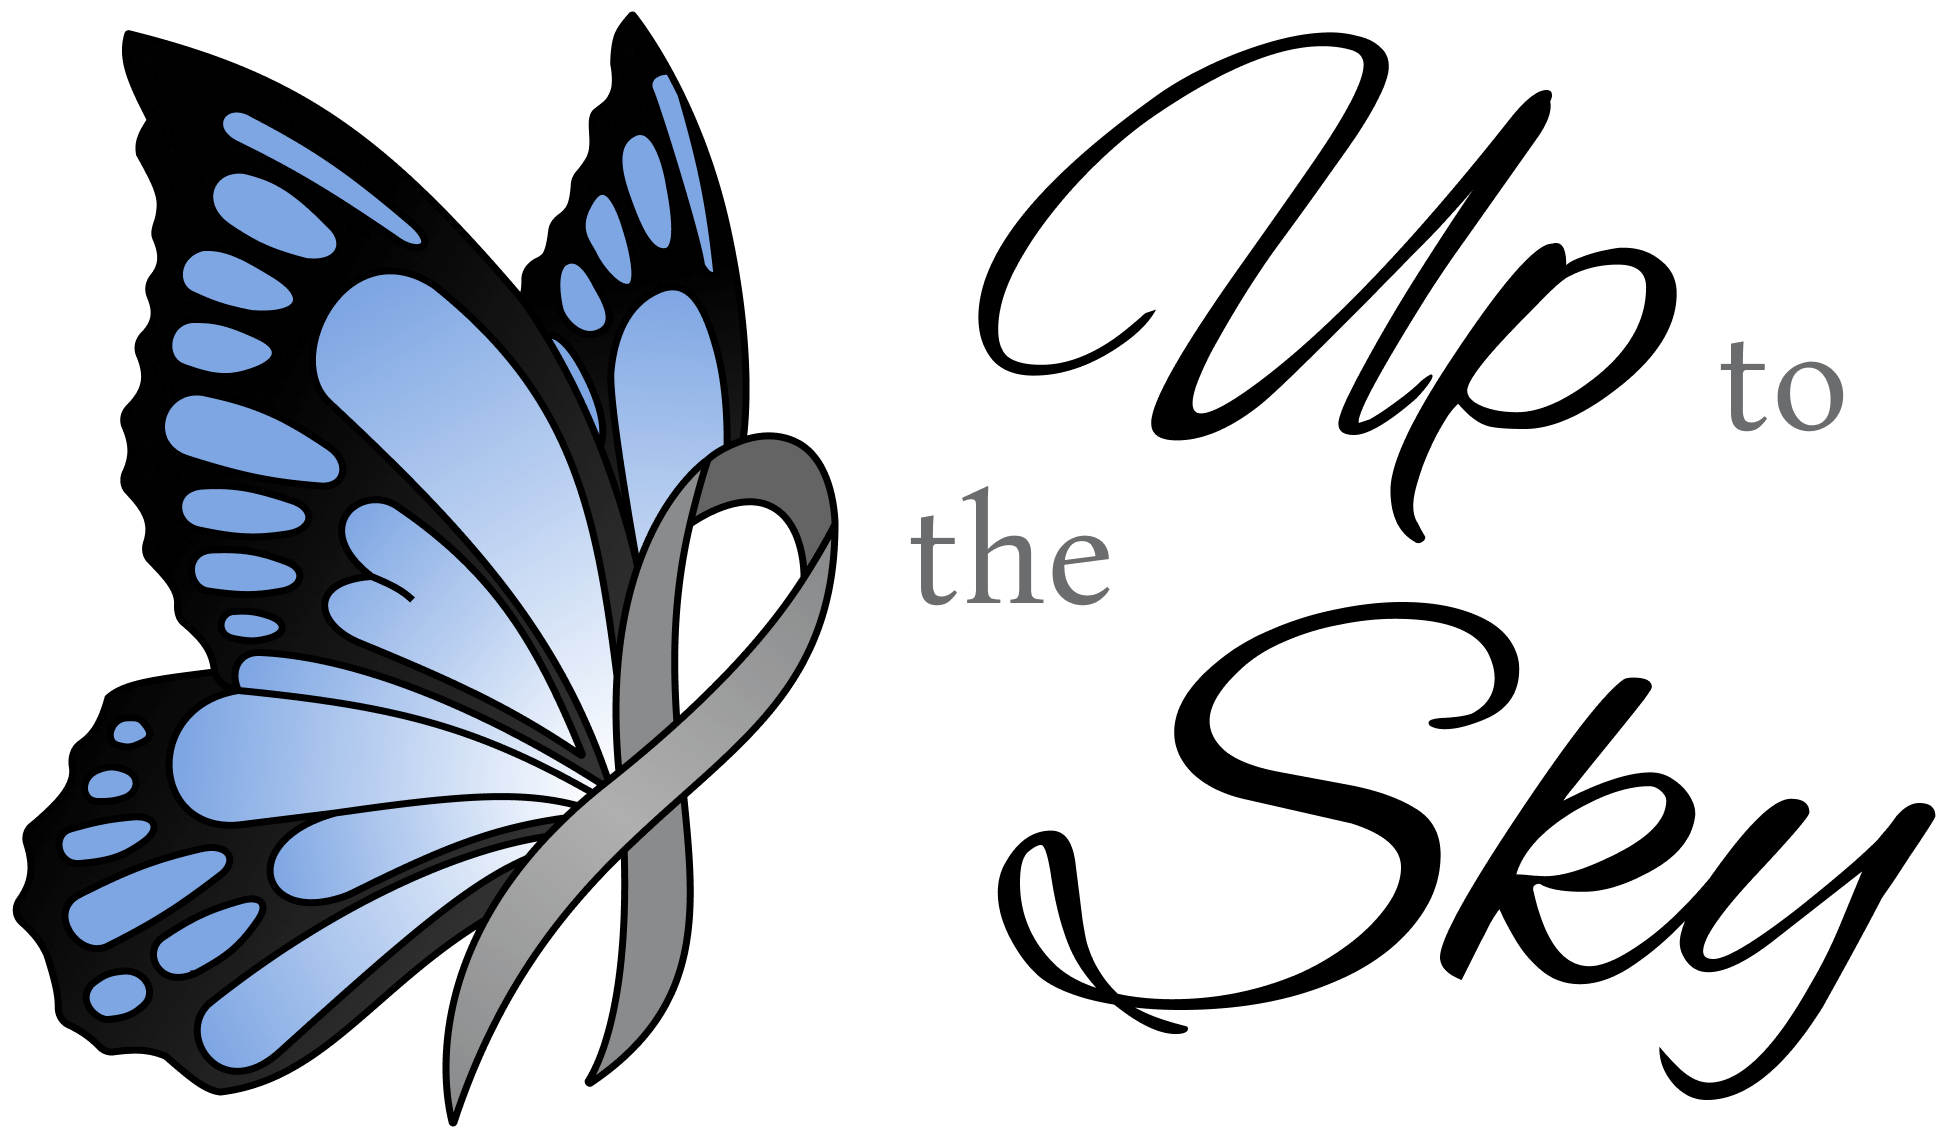 Up to the Sky logo featuring a butterfly with a brain cancer awareness ribbon for a body.